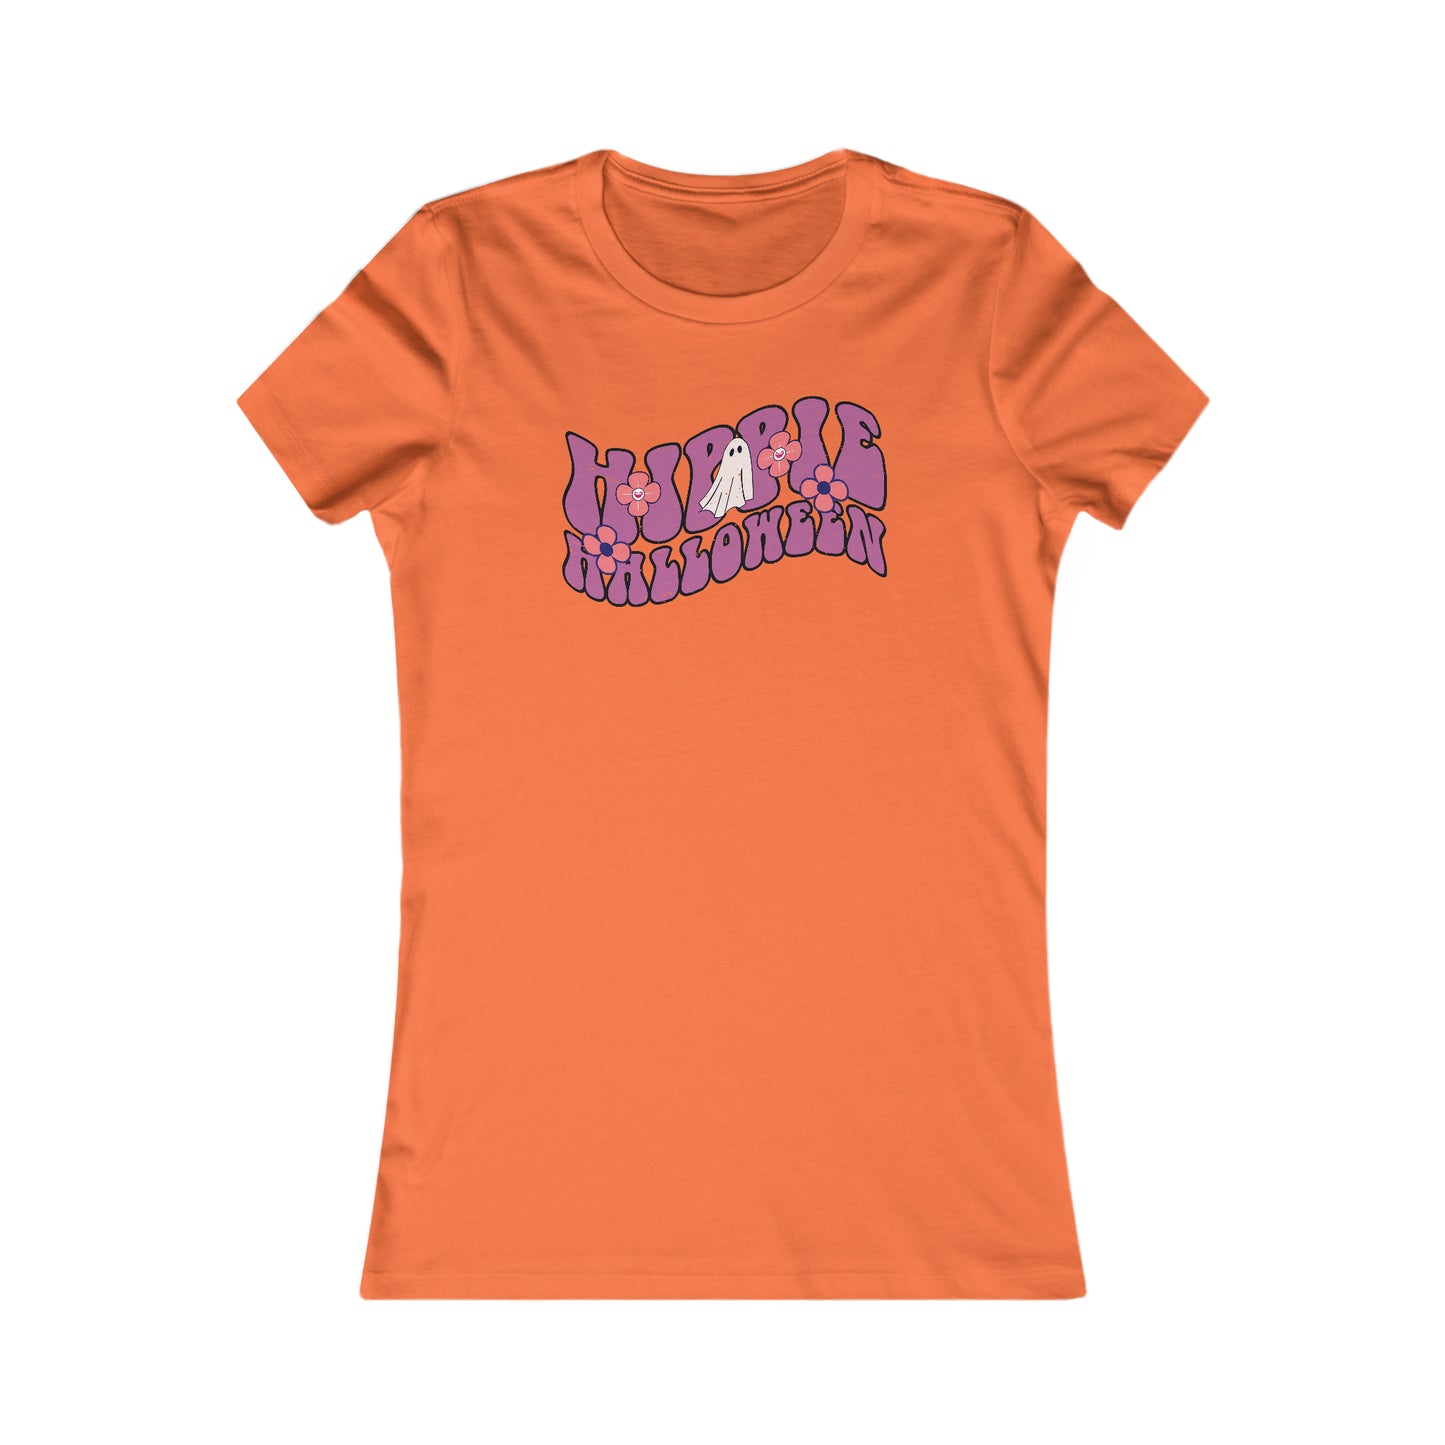 Hippie T-Shirt For Halloween TShirt For All Hallows Eve T Shirt For Fun Halloween Costume